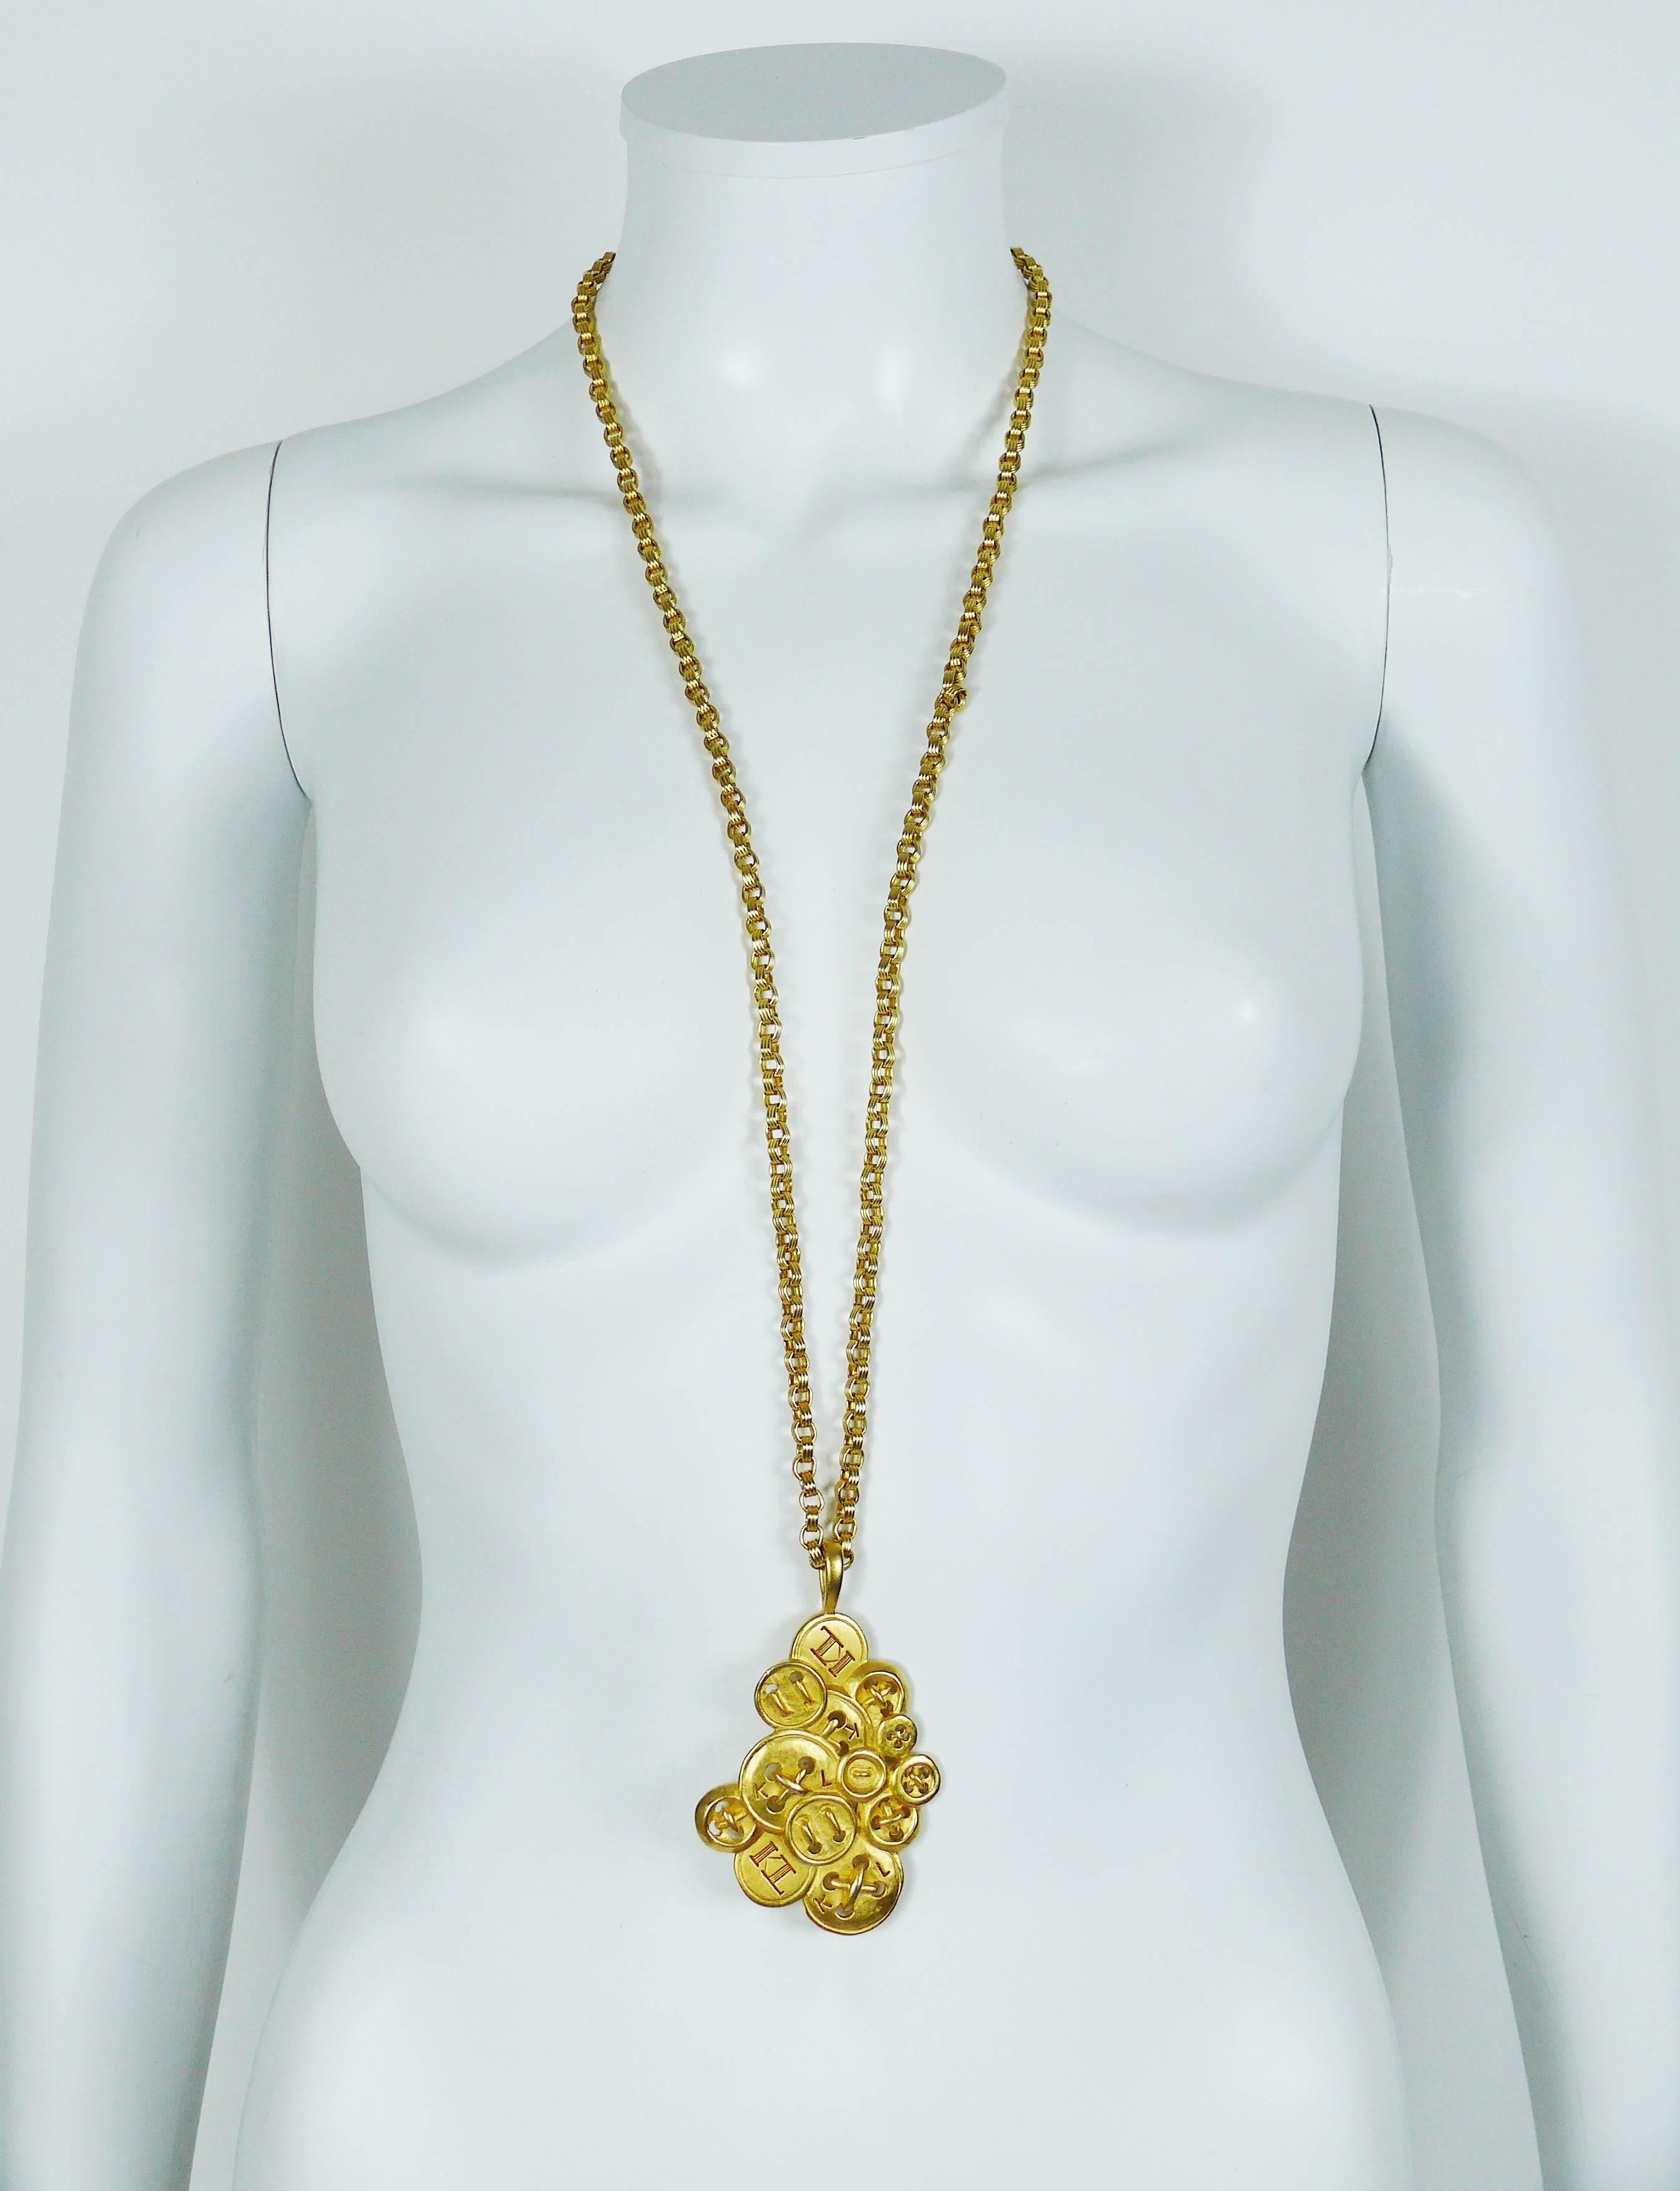 KARL LAGERFELD vintage iconic chunky gold tone chain sautoir necklace featuring a massive pendant made of numerous buttons, some embossed with designer's monogram.

Marked KL.

Indicative measurements : total length approx. 95 cm (37.40 inches) /